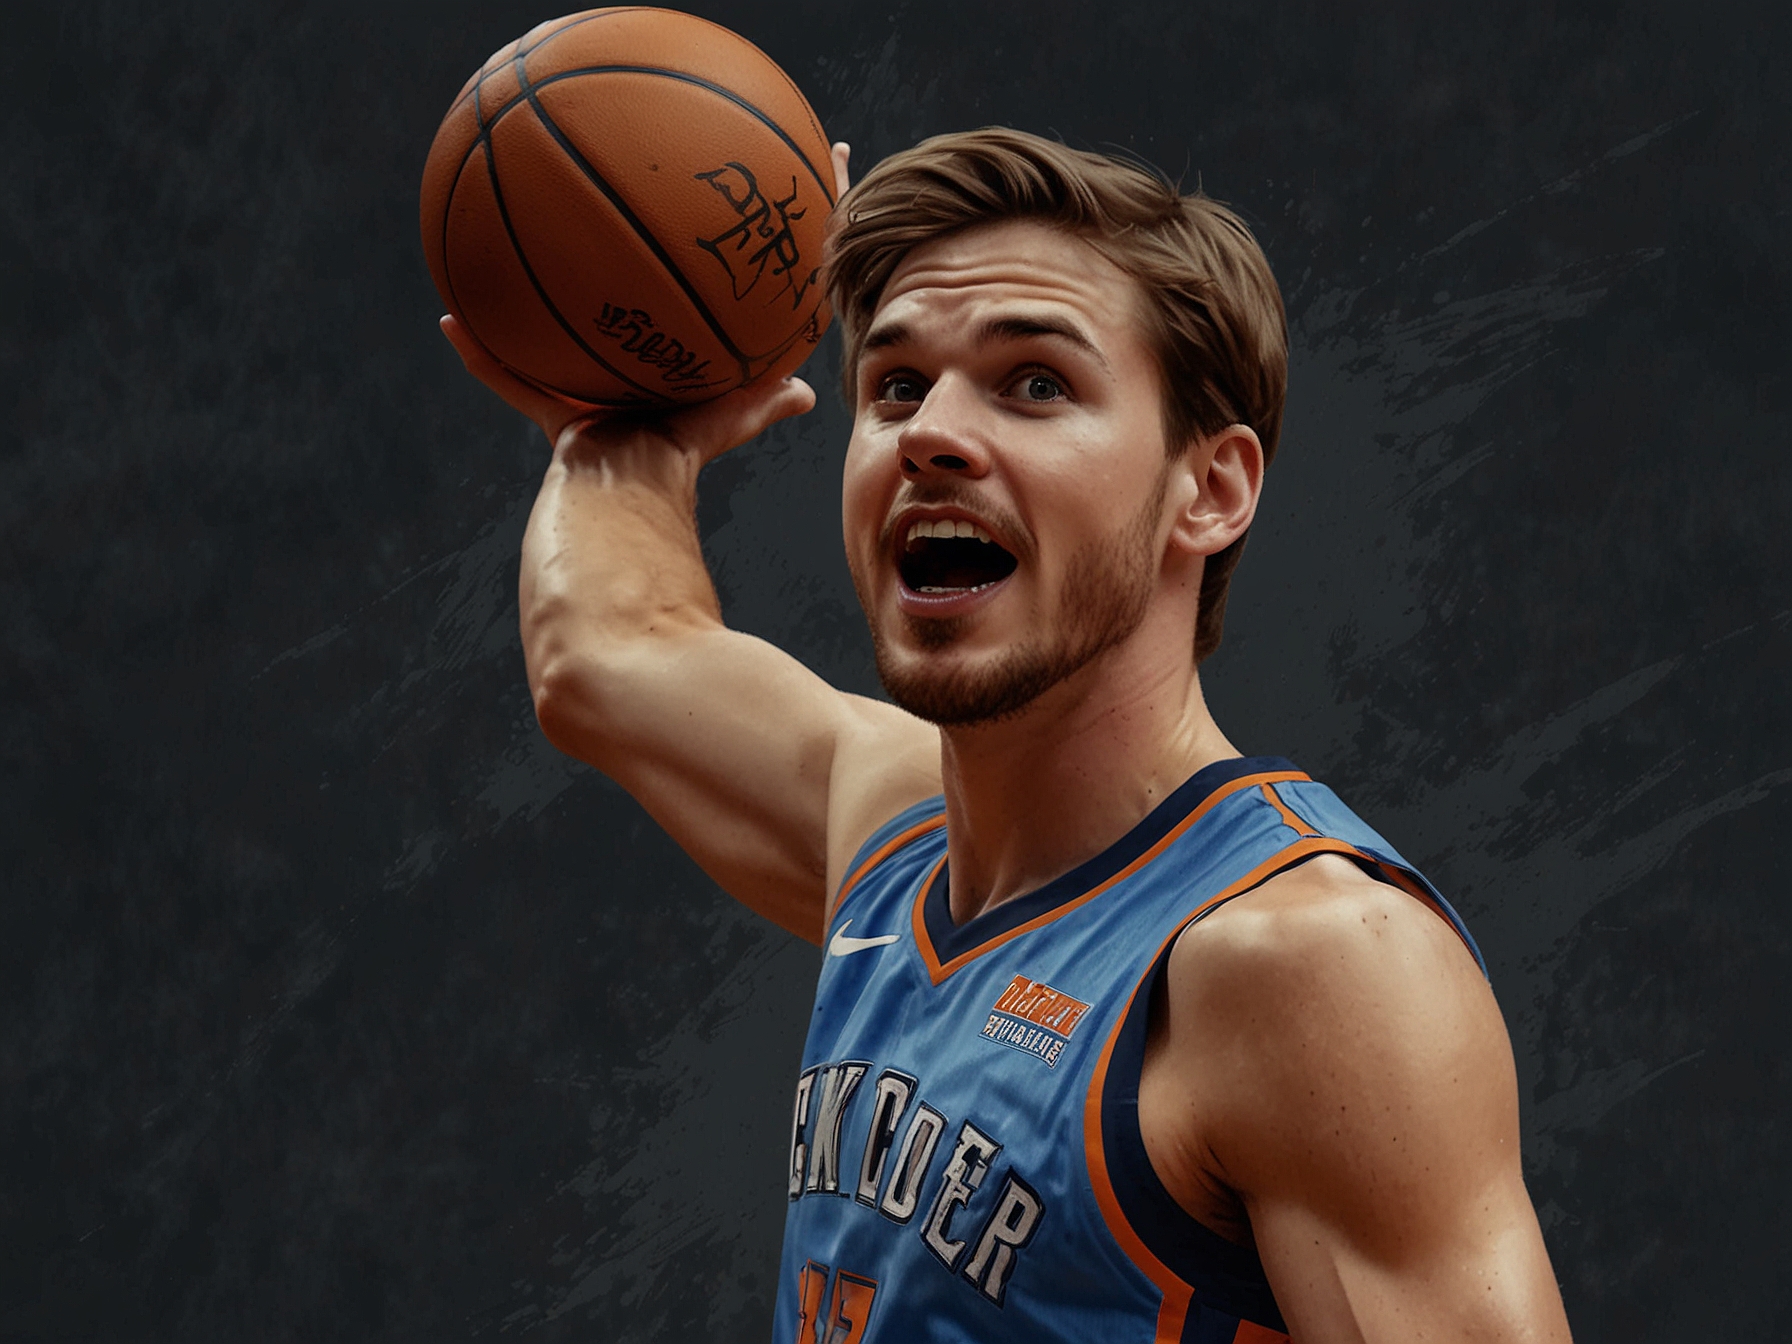 Josh Giddey, in his OKC Thunder uniform, showcasing his playmaking skills on the court, representing the fresh offensive talent and versatility he will bring to the Chicago Bulls.